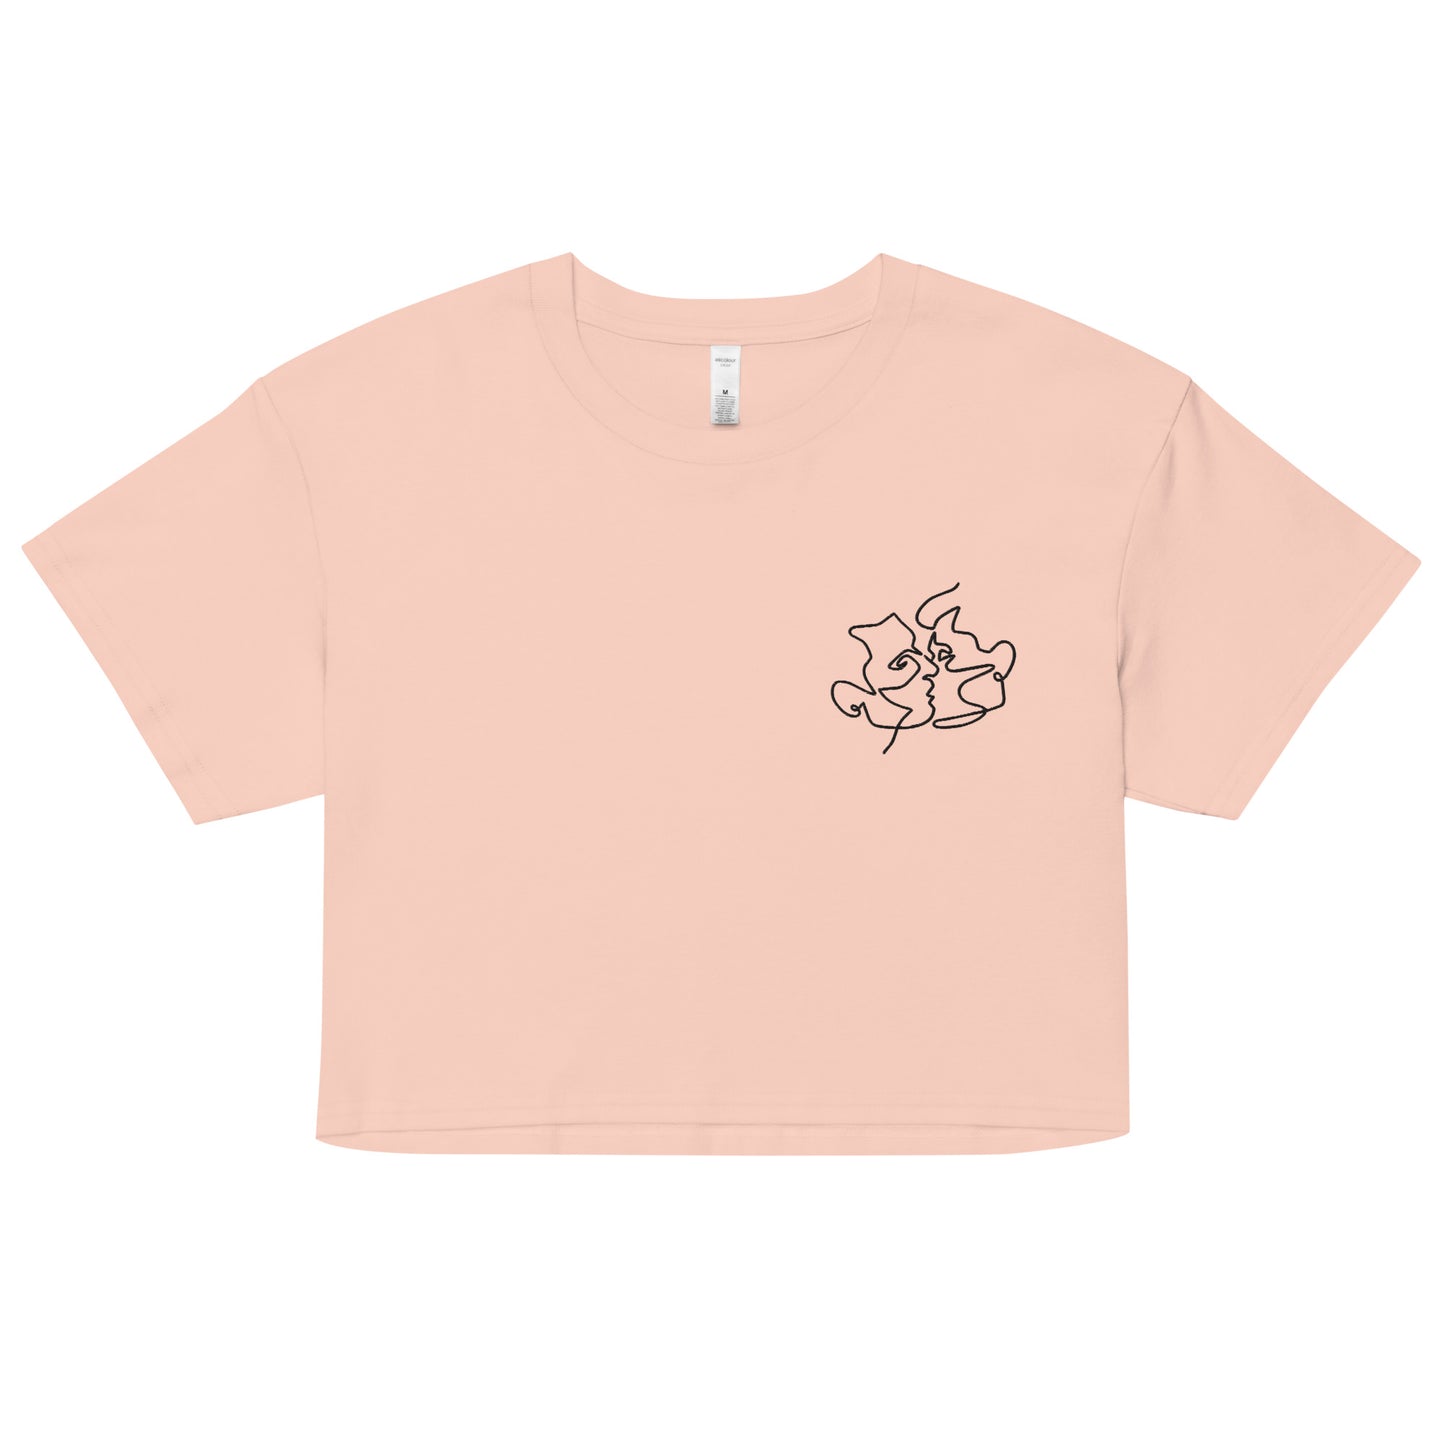 A relaxed, modest pale pink crop top features a subtle black embroidery featuring a minimalistic line art of gay lovers kissing. Adding a touch of love is love to your look—a playful celebration of lgbtq culture! Made from 100% combed cotton. Available in Extra Small, Small, Medium, Large, Extra Large.